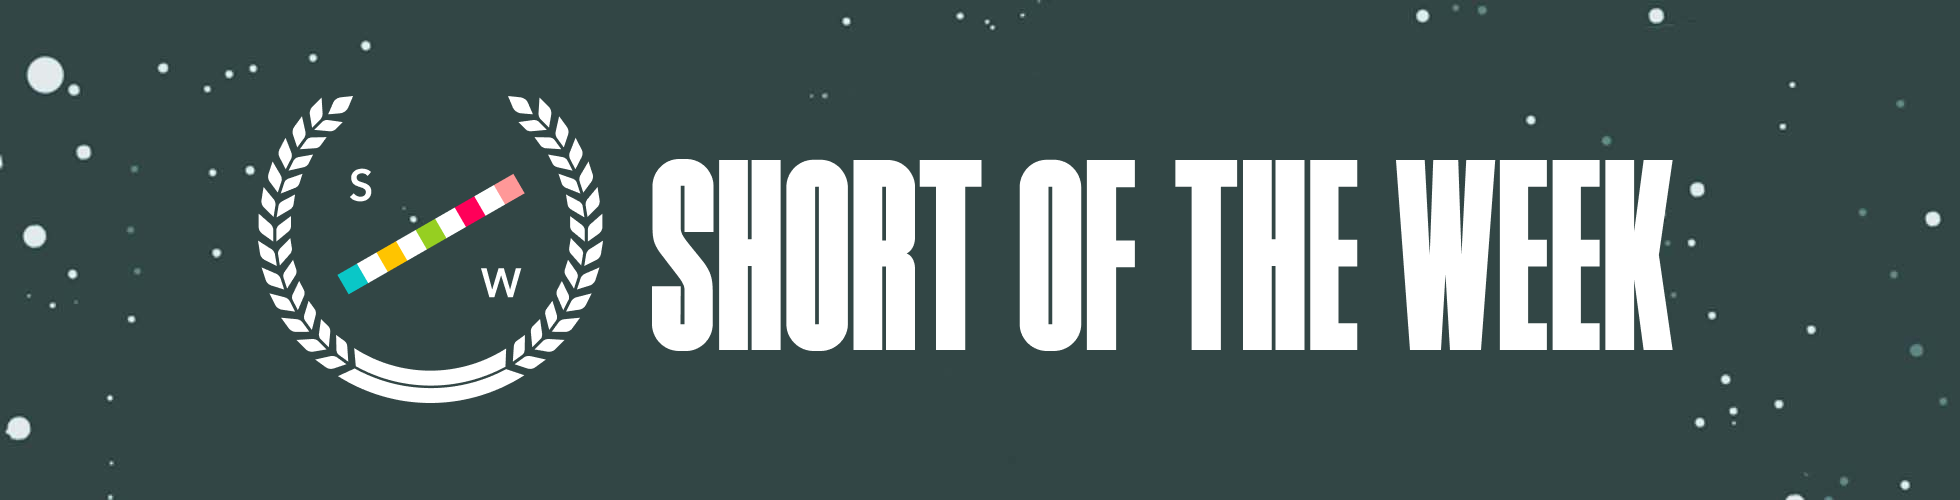 Short Of The Week banner